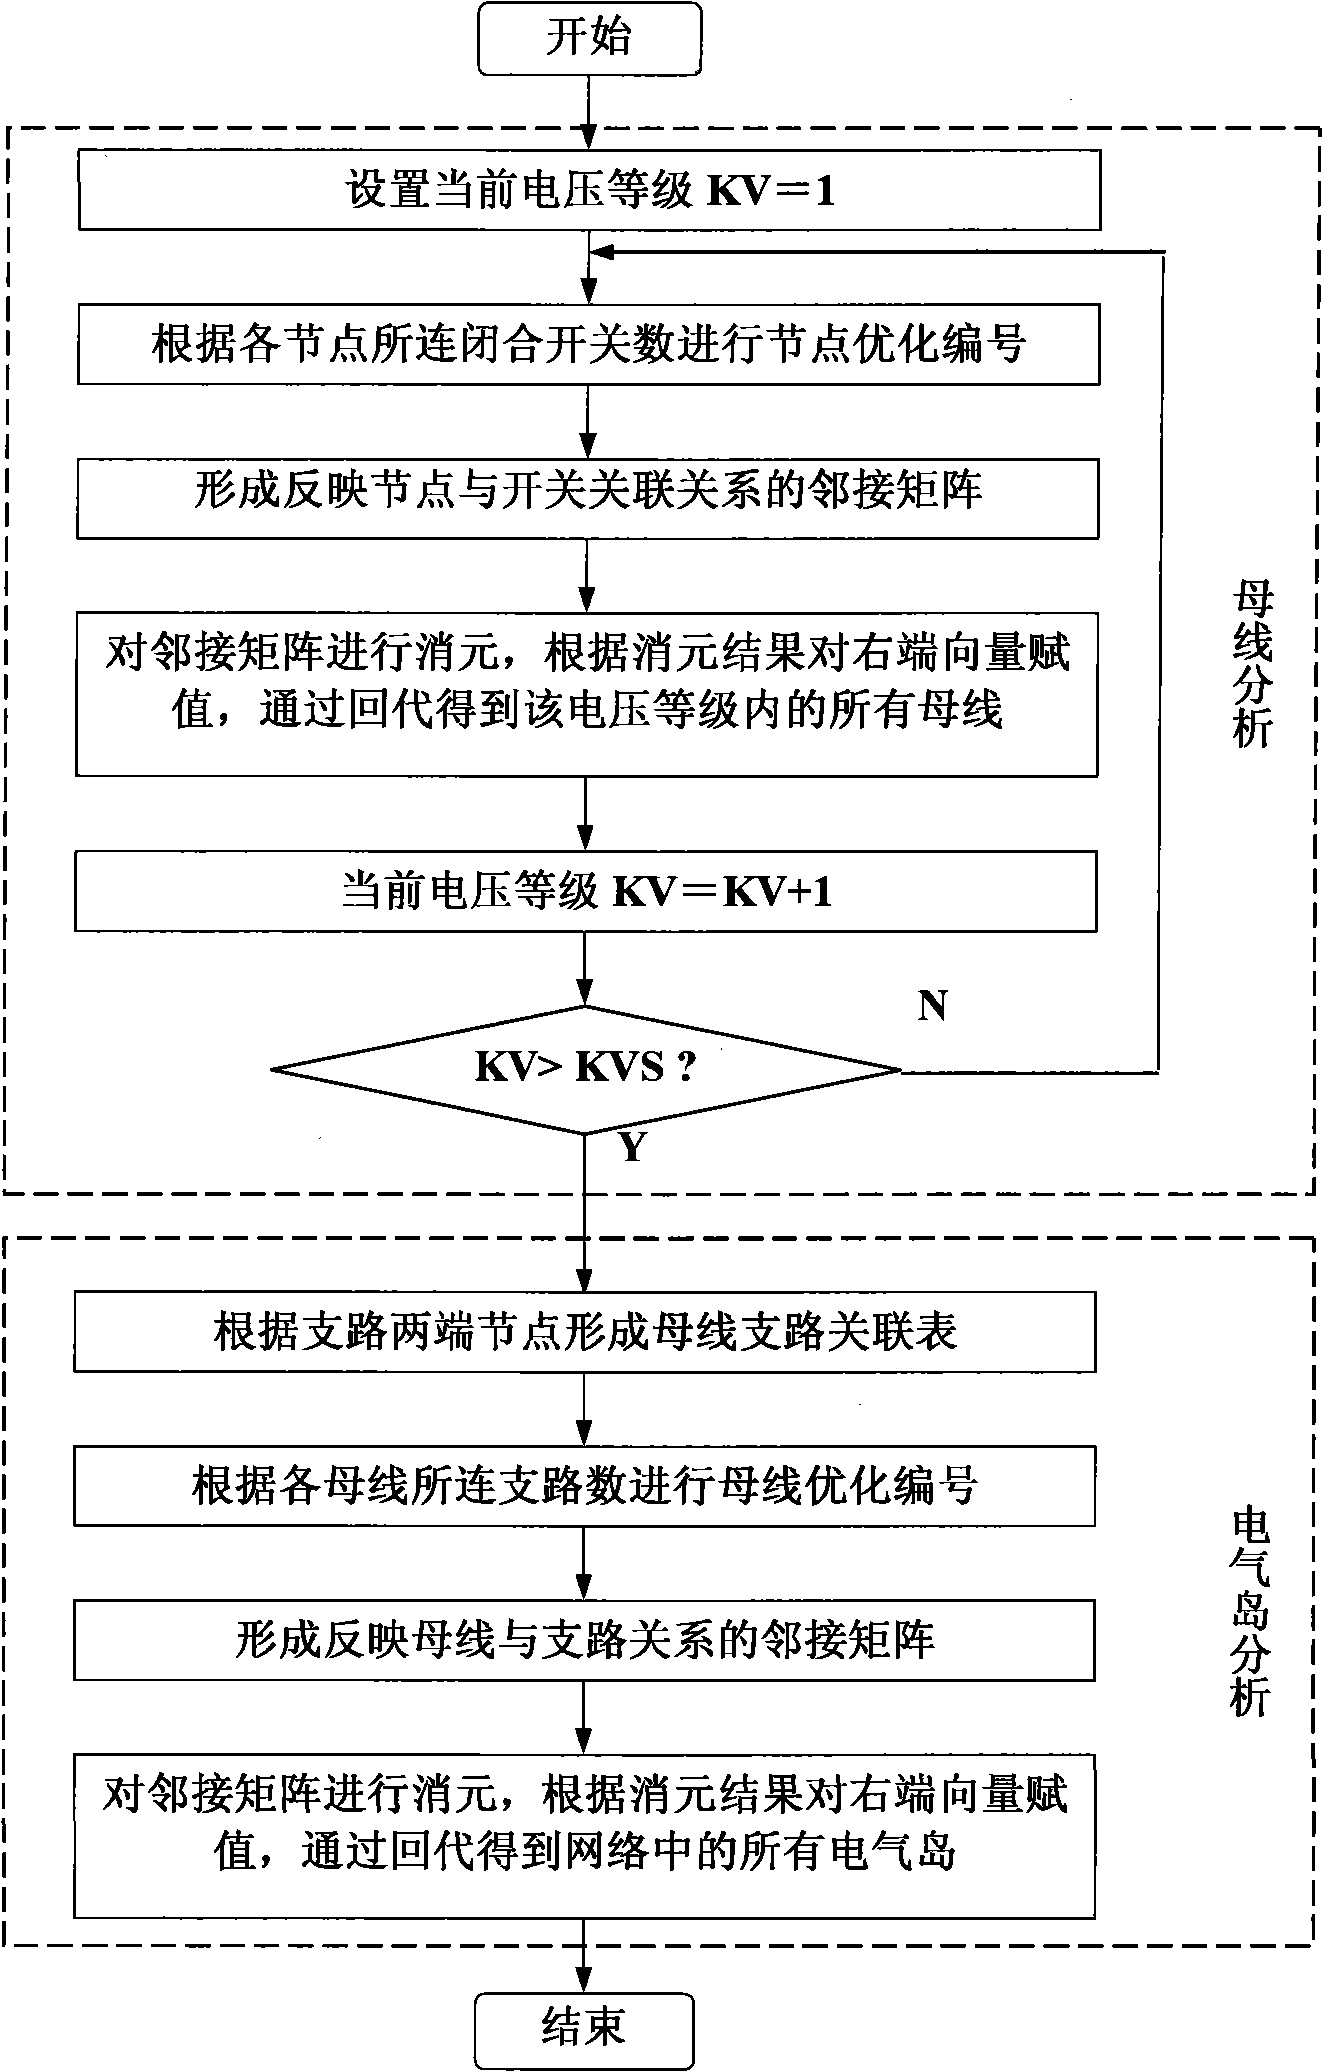 Network topology analyzing method for electrical power system